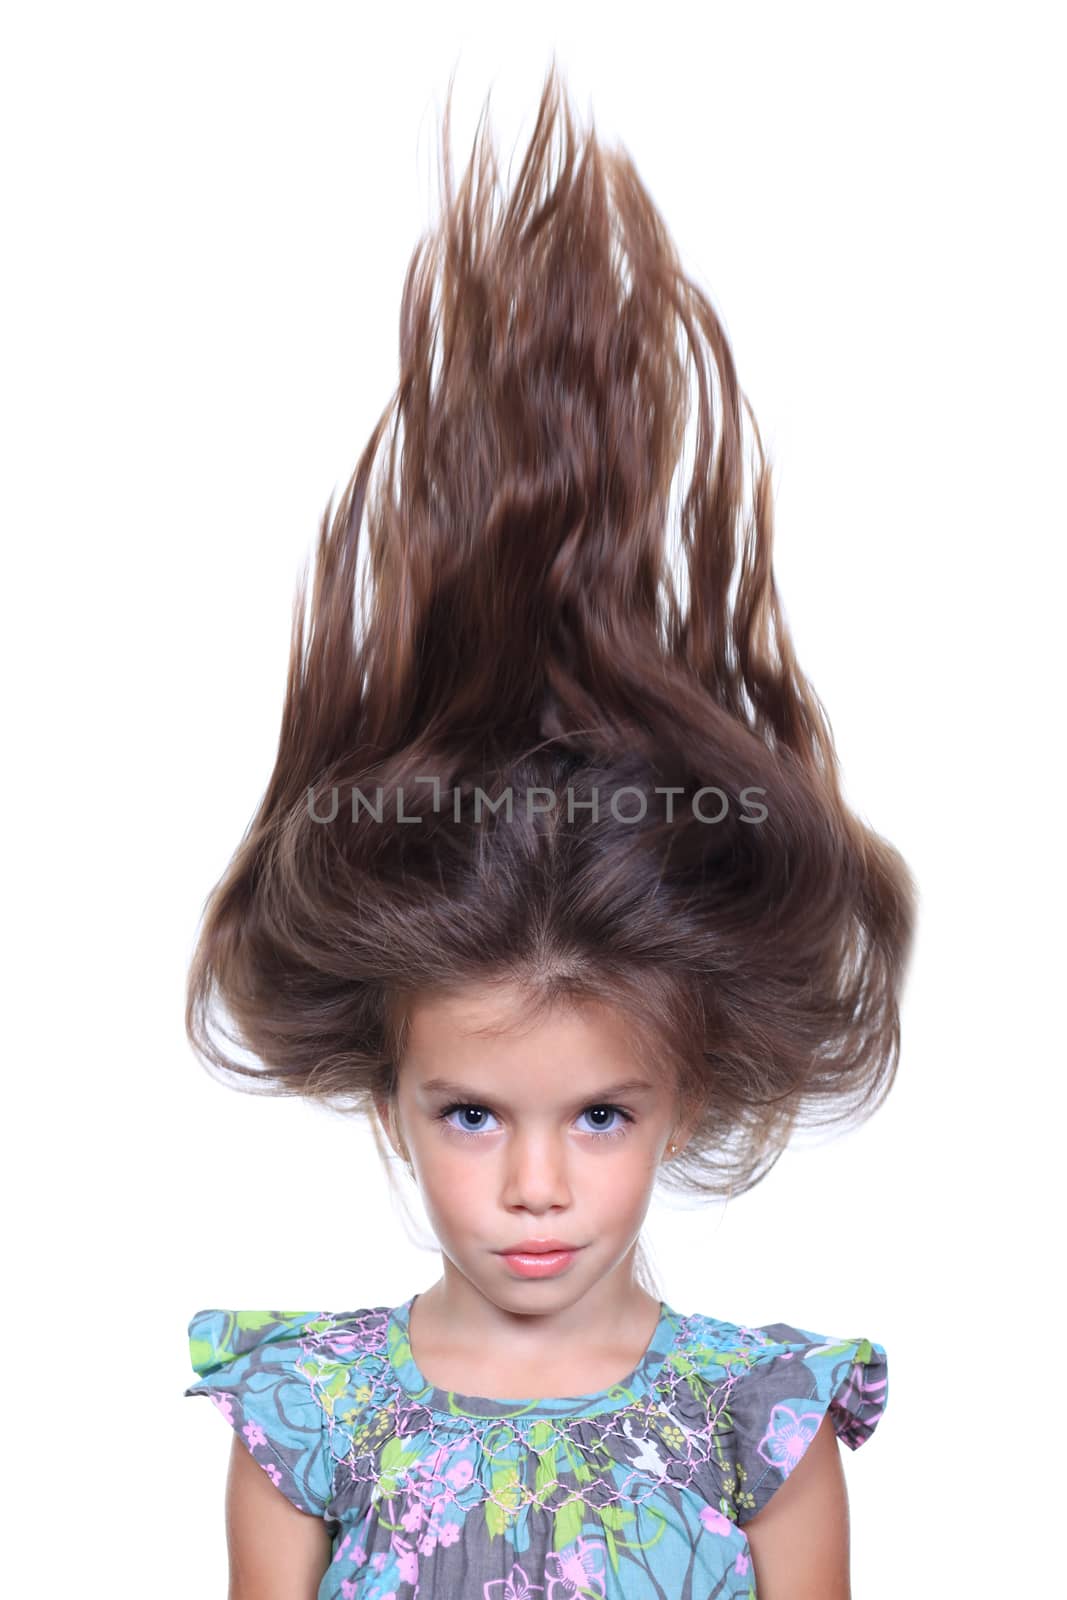 portrait of little girl with extravagant hair on his head